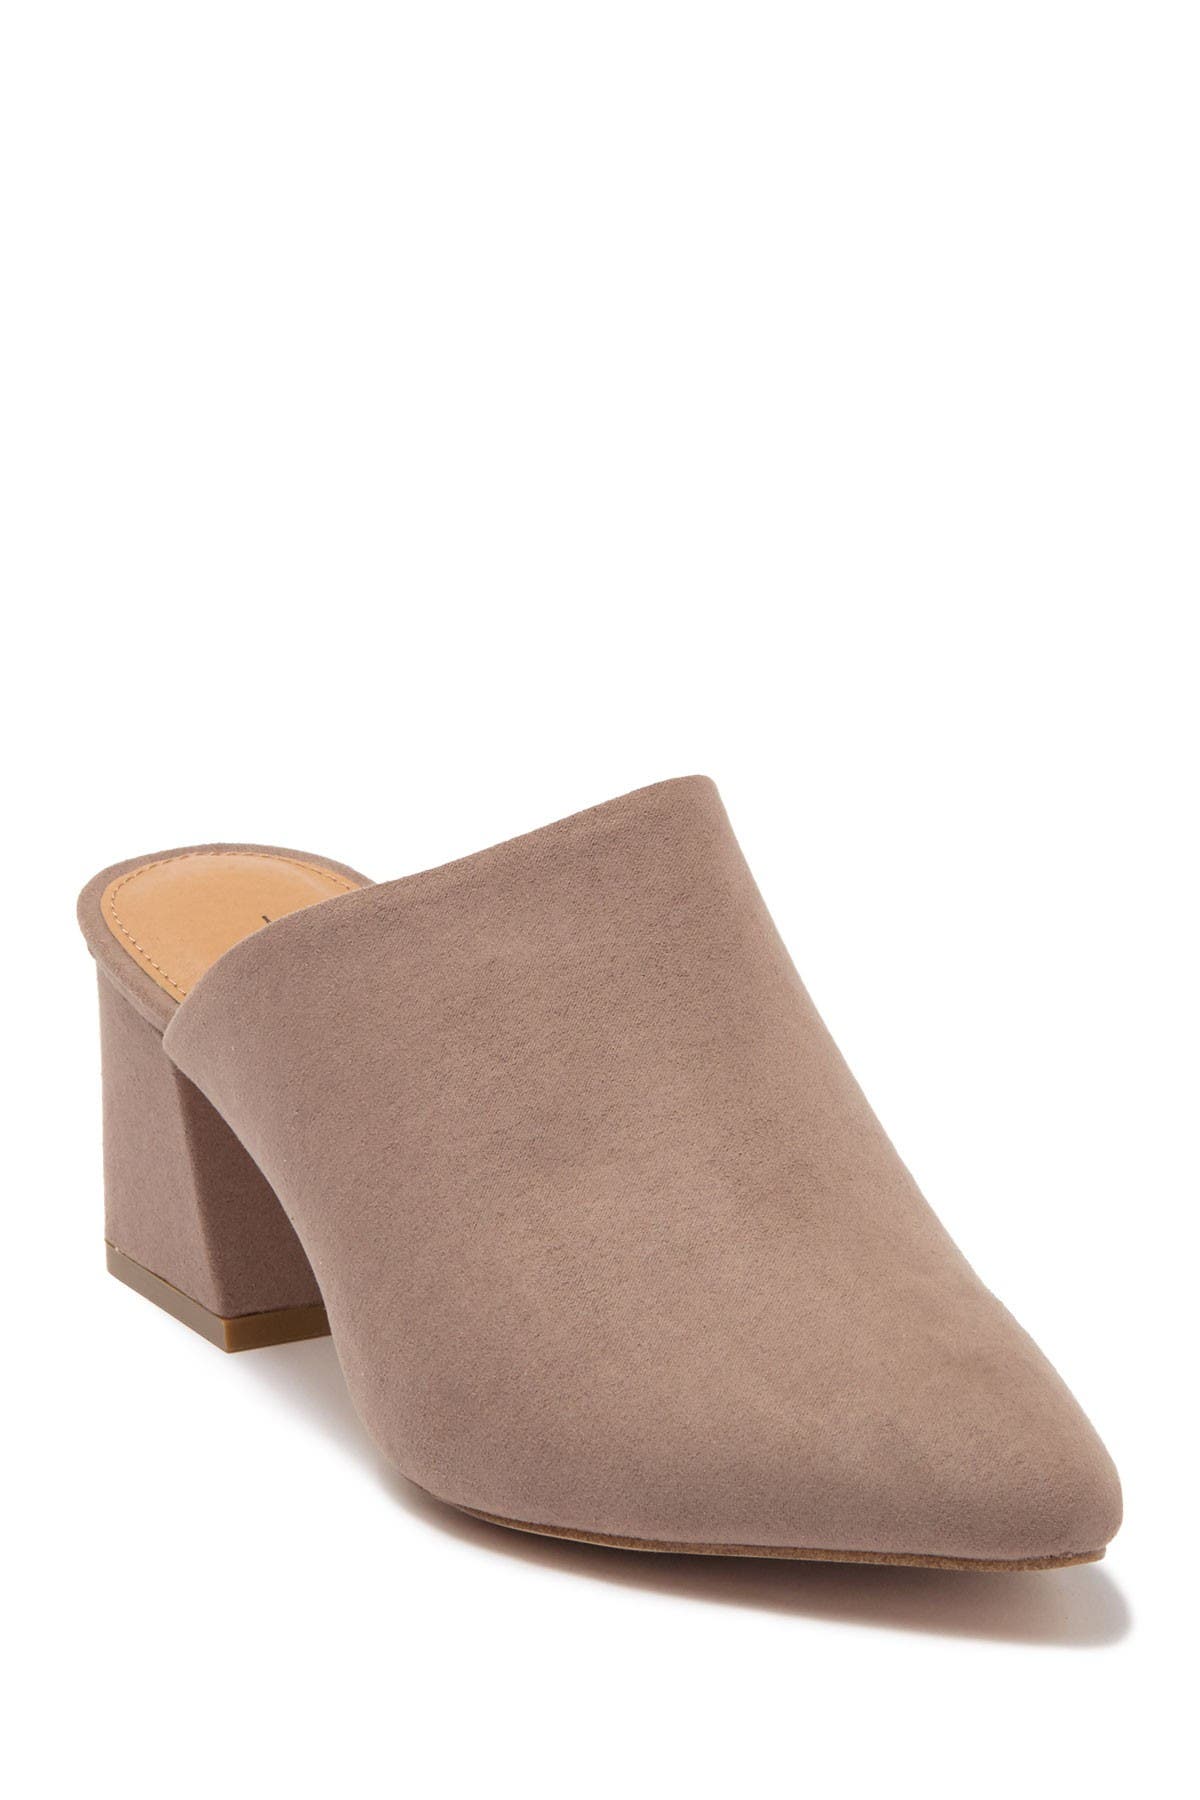 Women's Mules Clearance | Nordstrom Rack